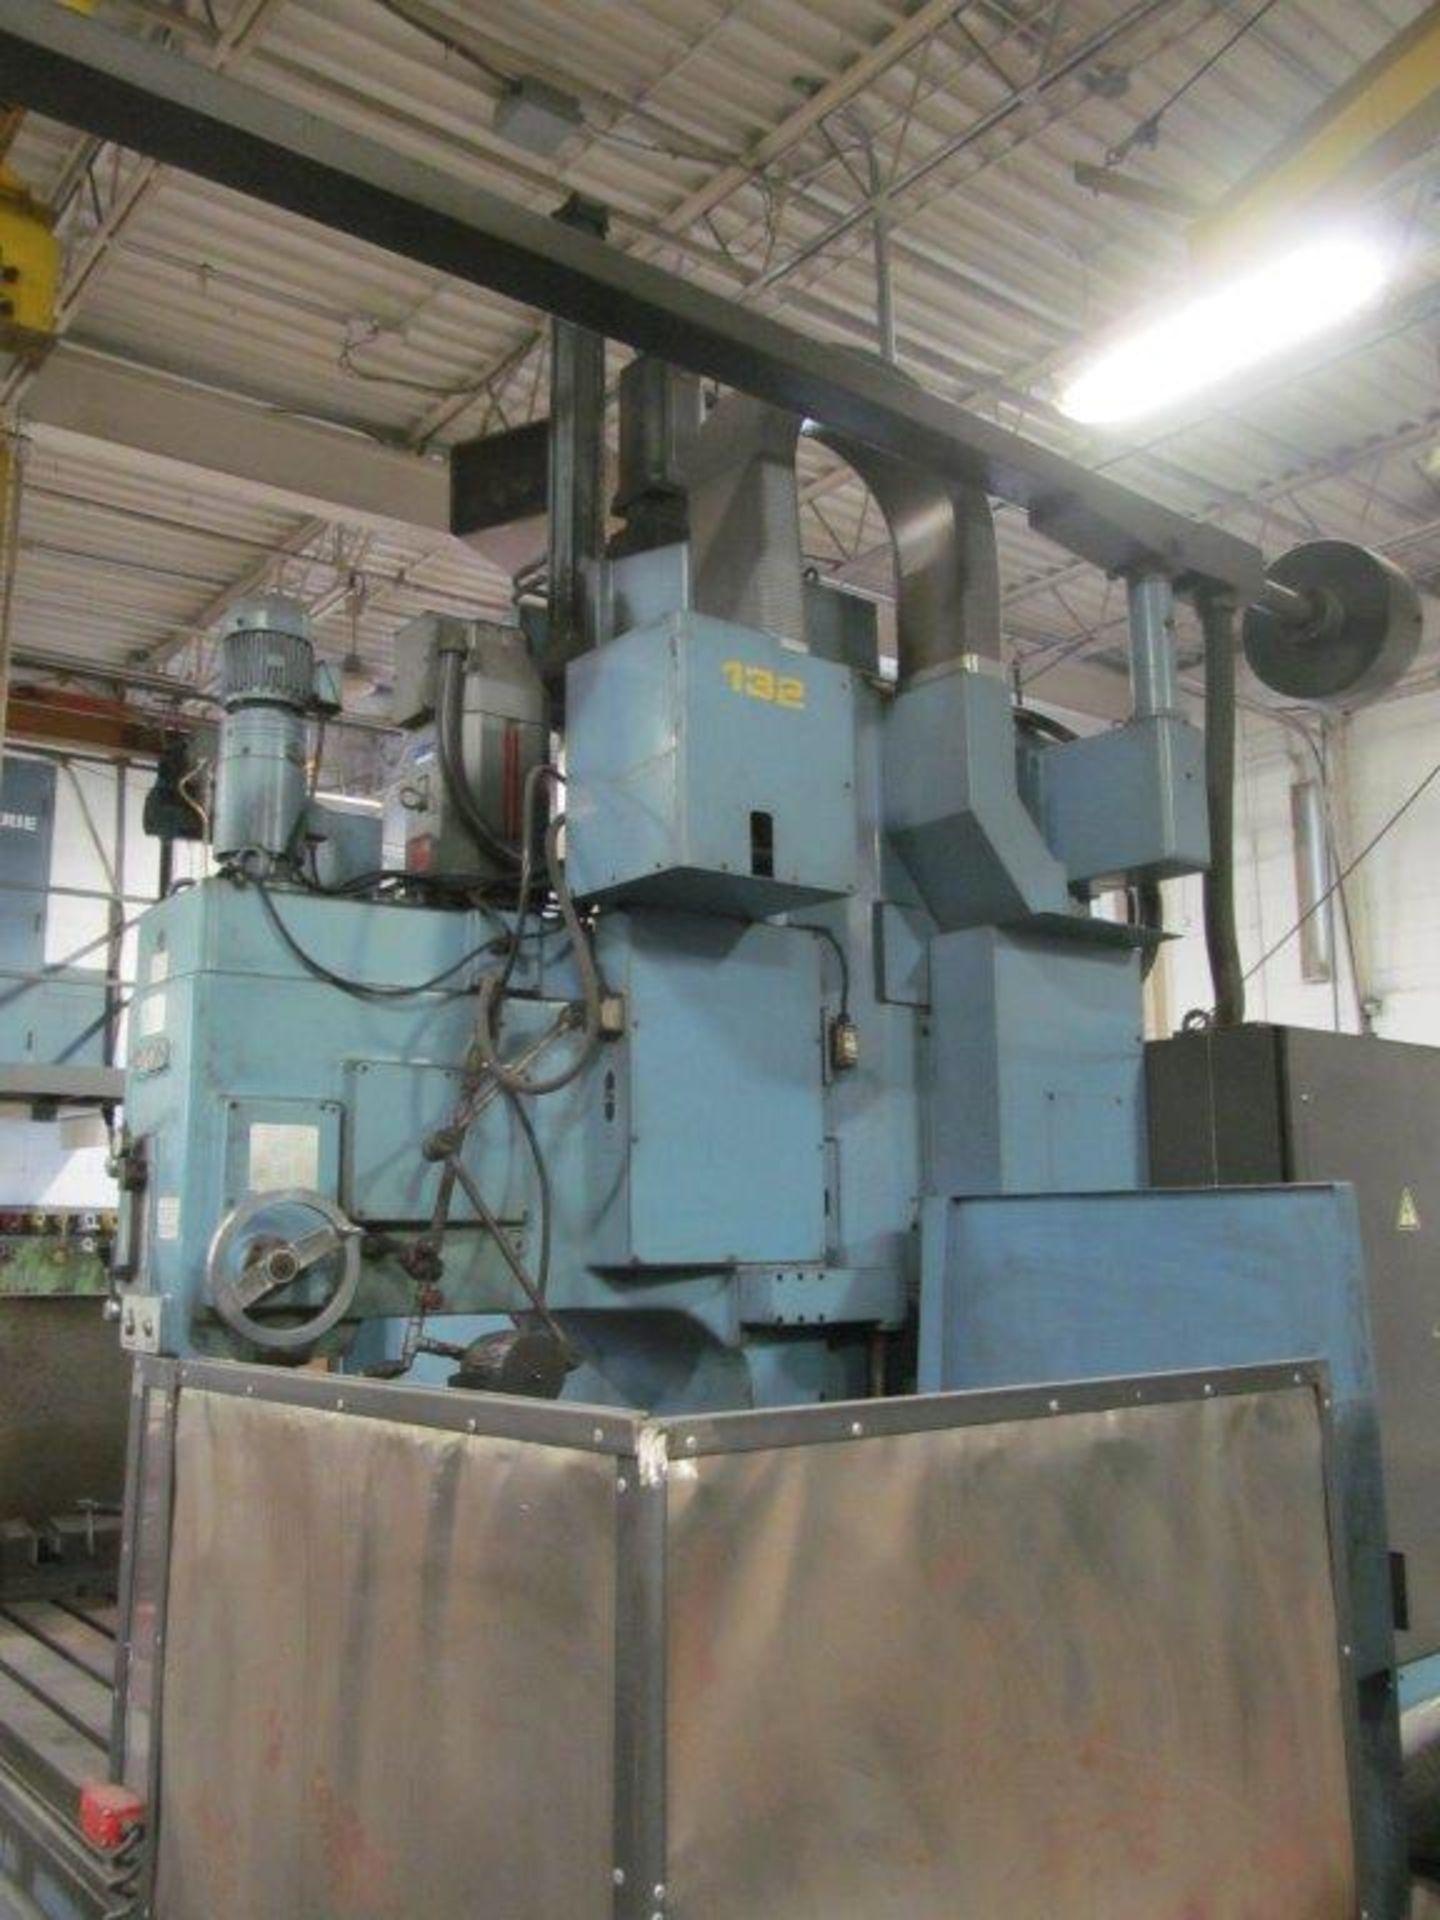 OKK CNC VERTICAL MACHINING CENTER, MHA 800, 33'' X 114'' (IN PLANT) - LOCATION, MONTREAL, QUEBEC - Image 2 of 7